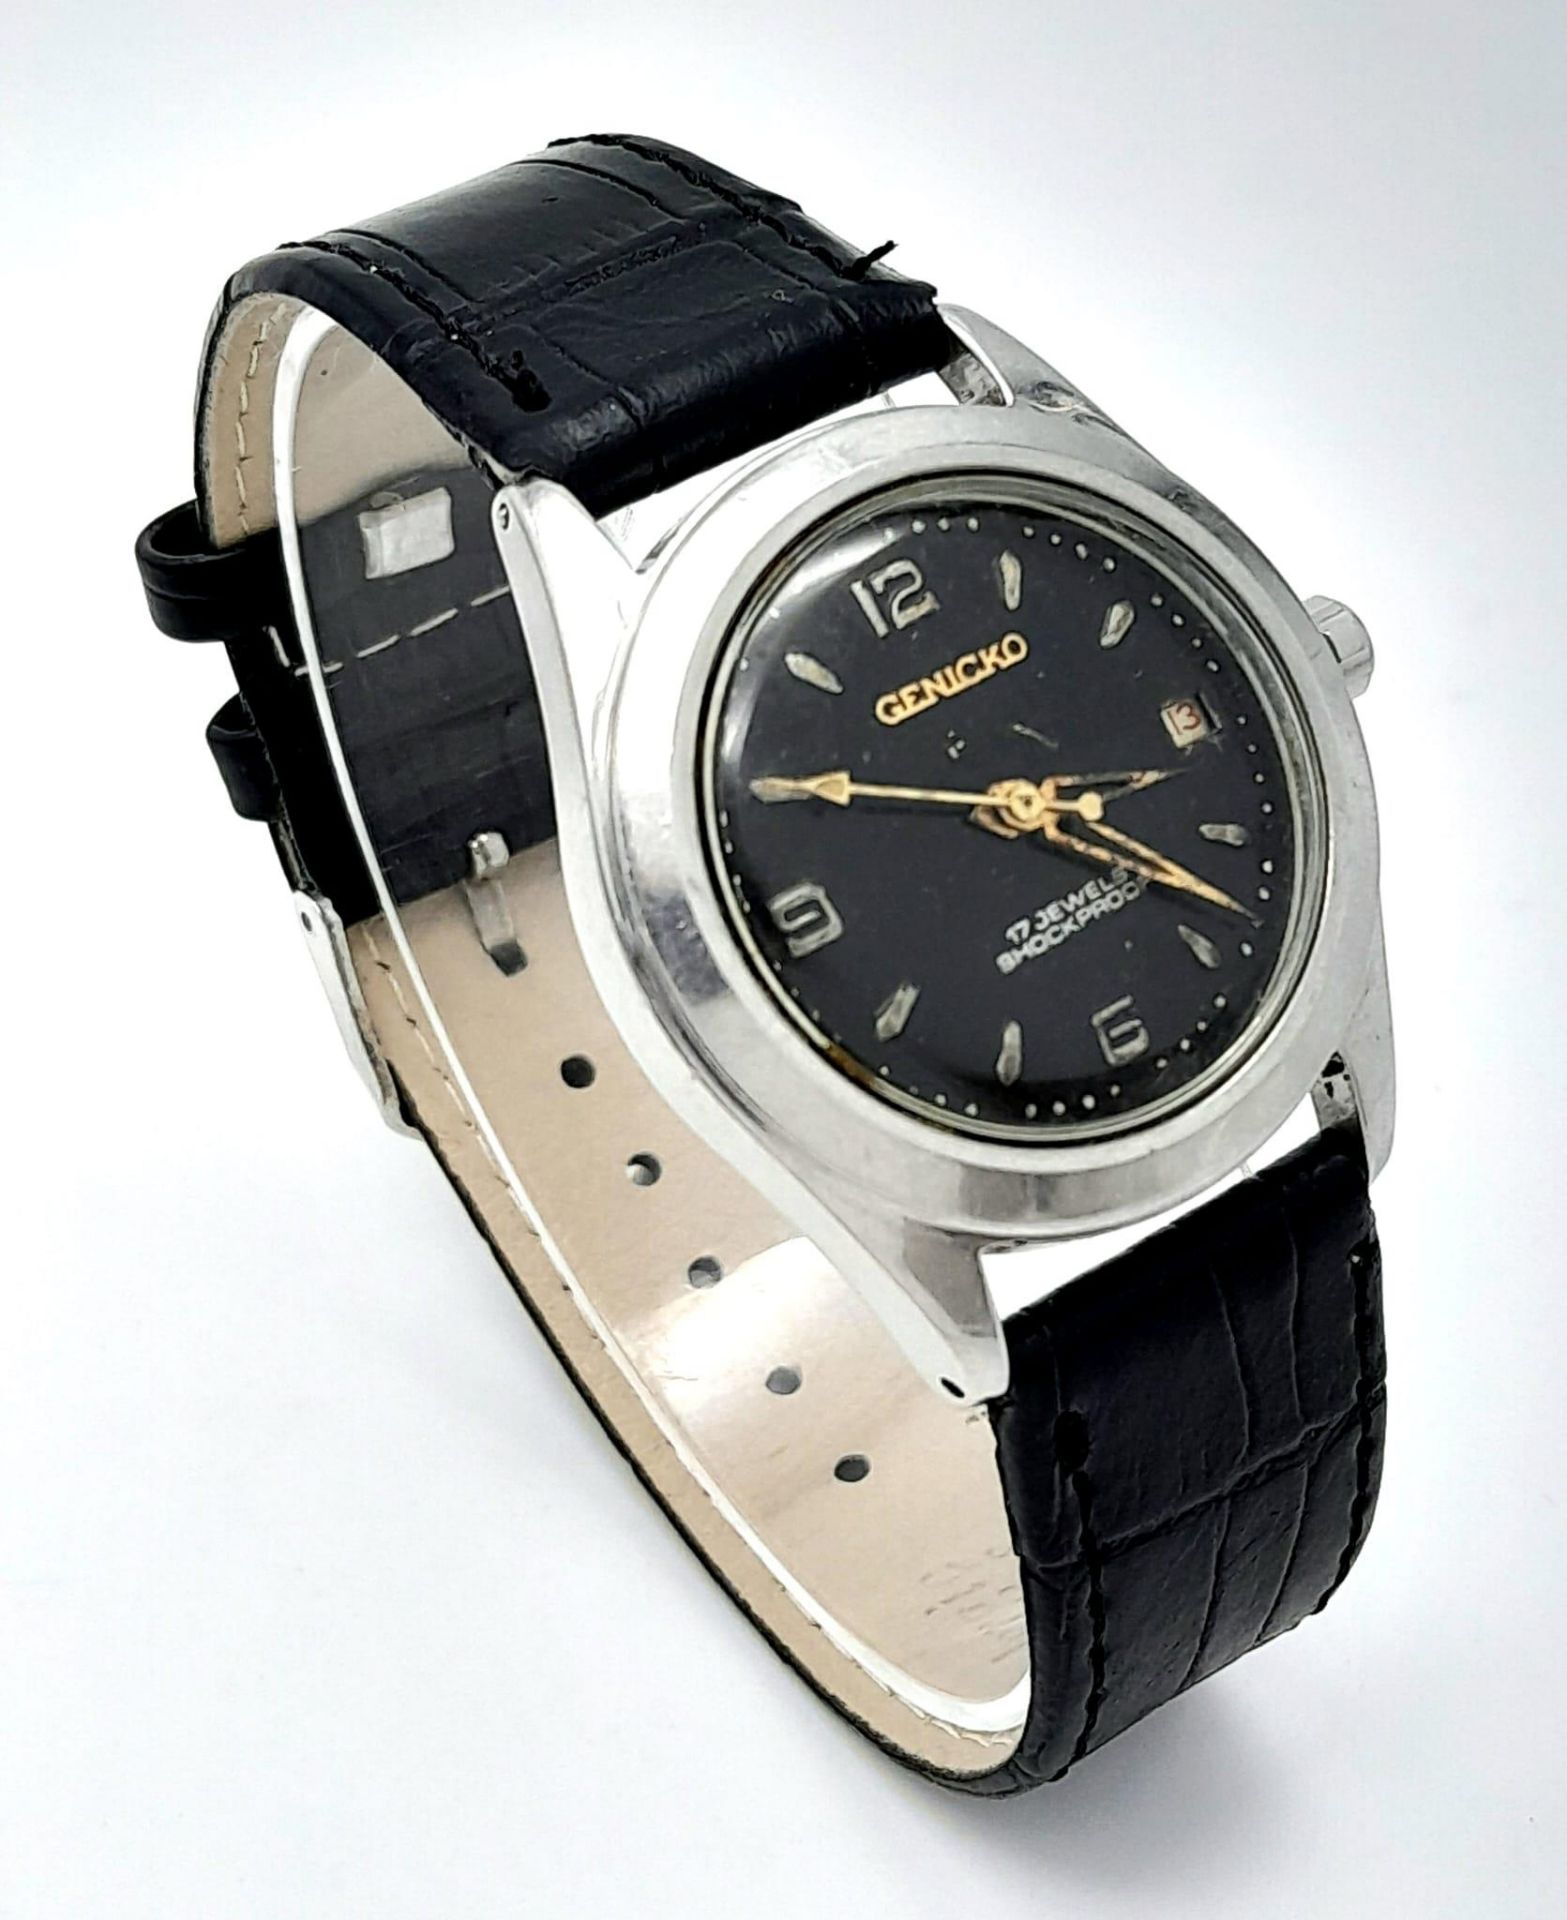 A Vintage Genicko Gents Mechanical Watch. Black leather strap. Stainless steel case - 36mm. Black - Image 4 of 11